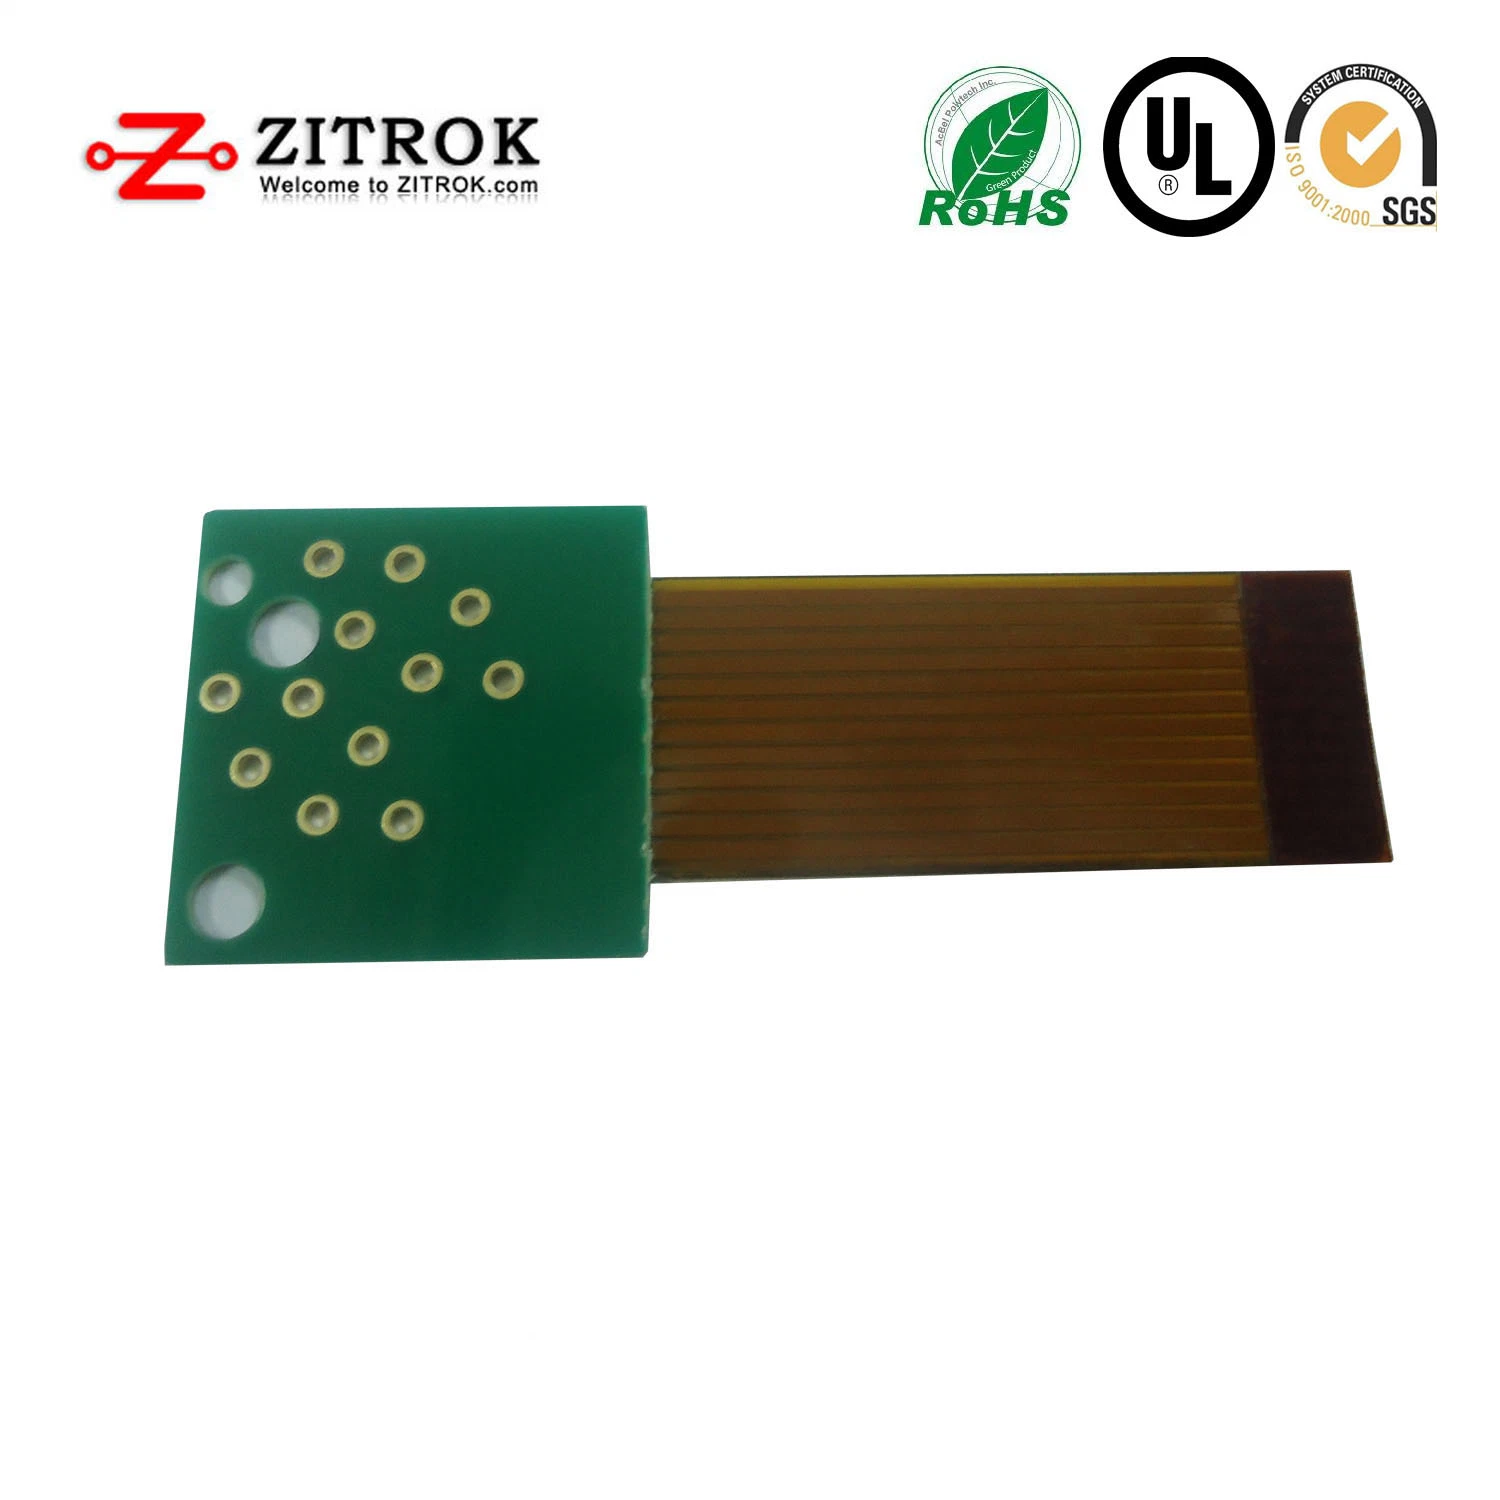 Rigid-Flex PCB&PCB Assembly Printed Circuit Board with Fast Delivery